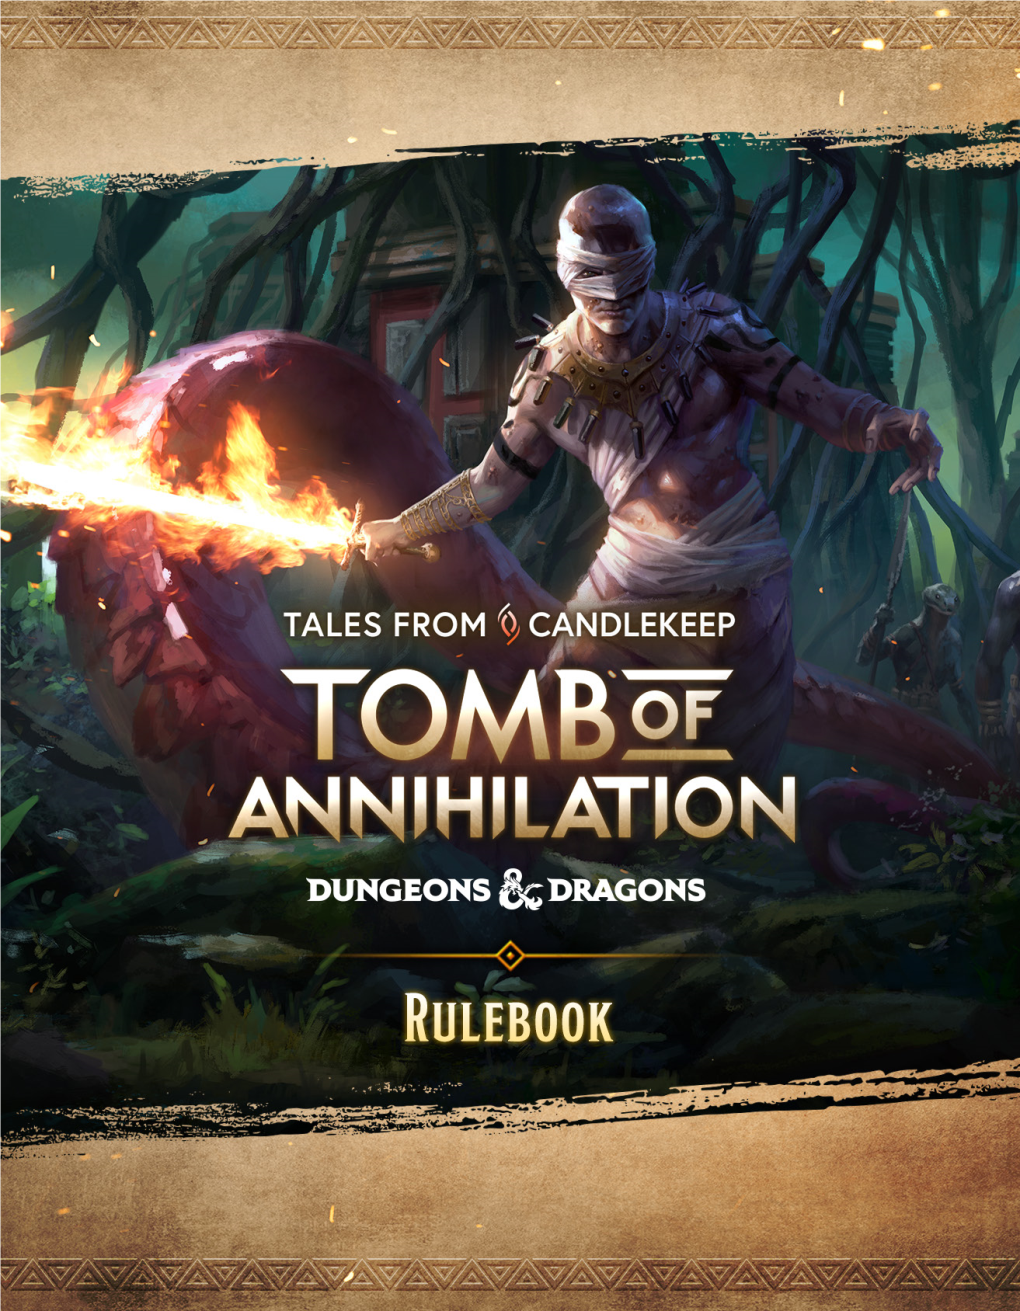 The Tomb of Annihilation